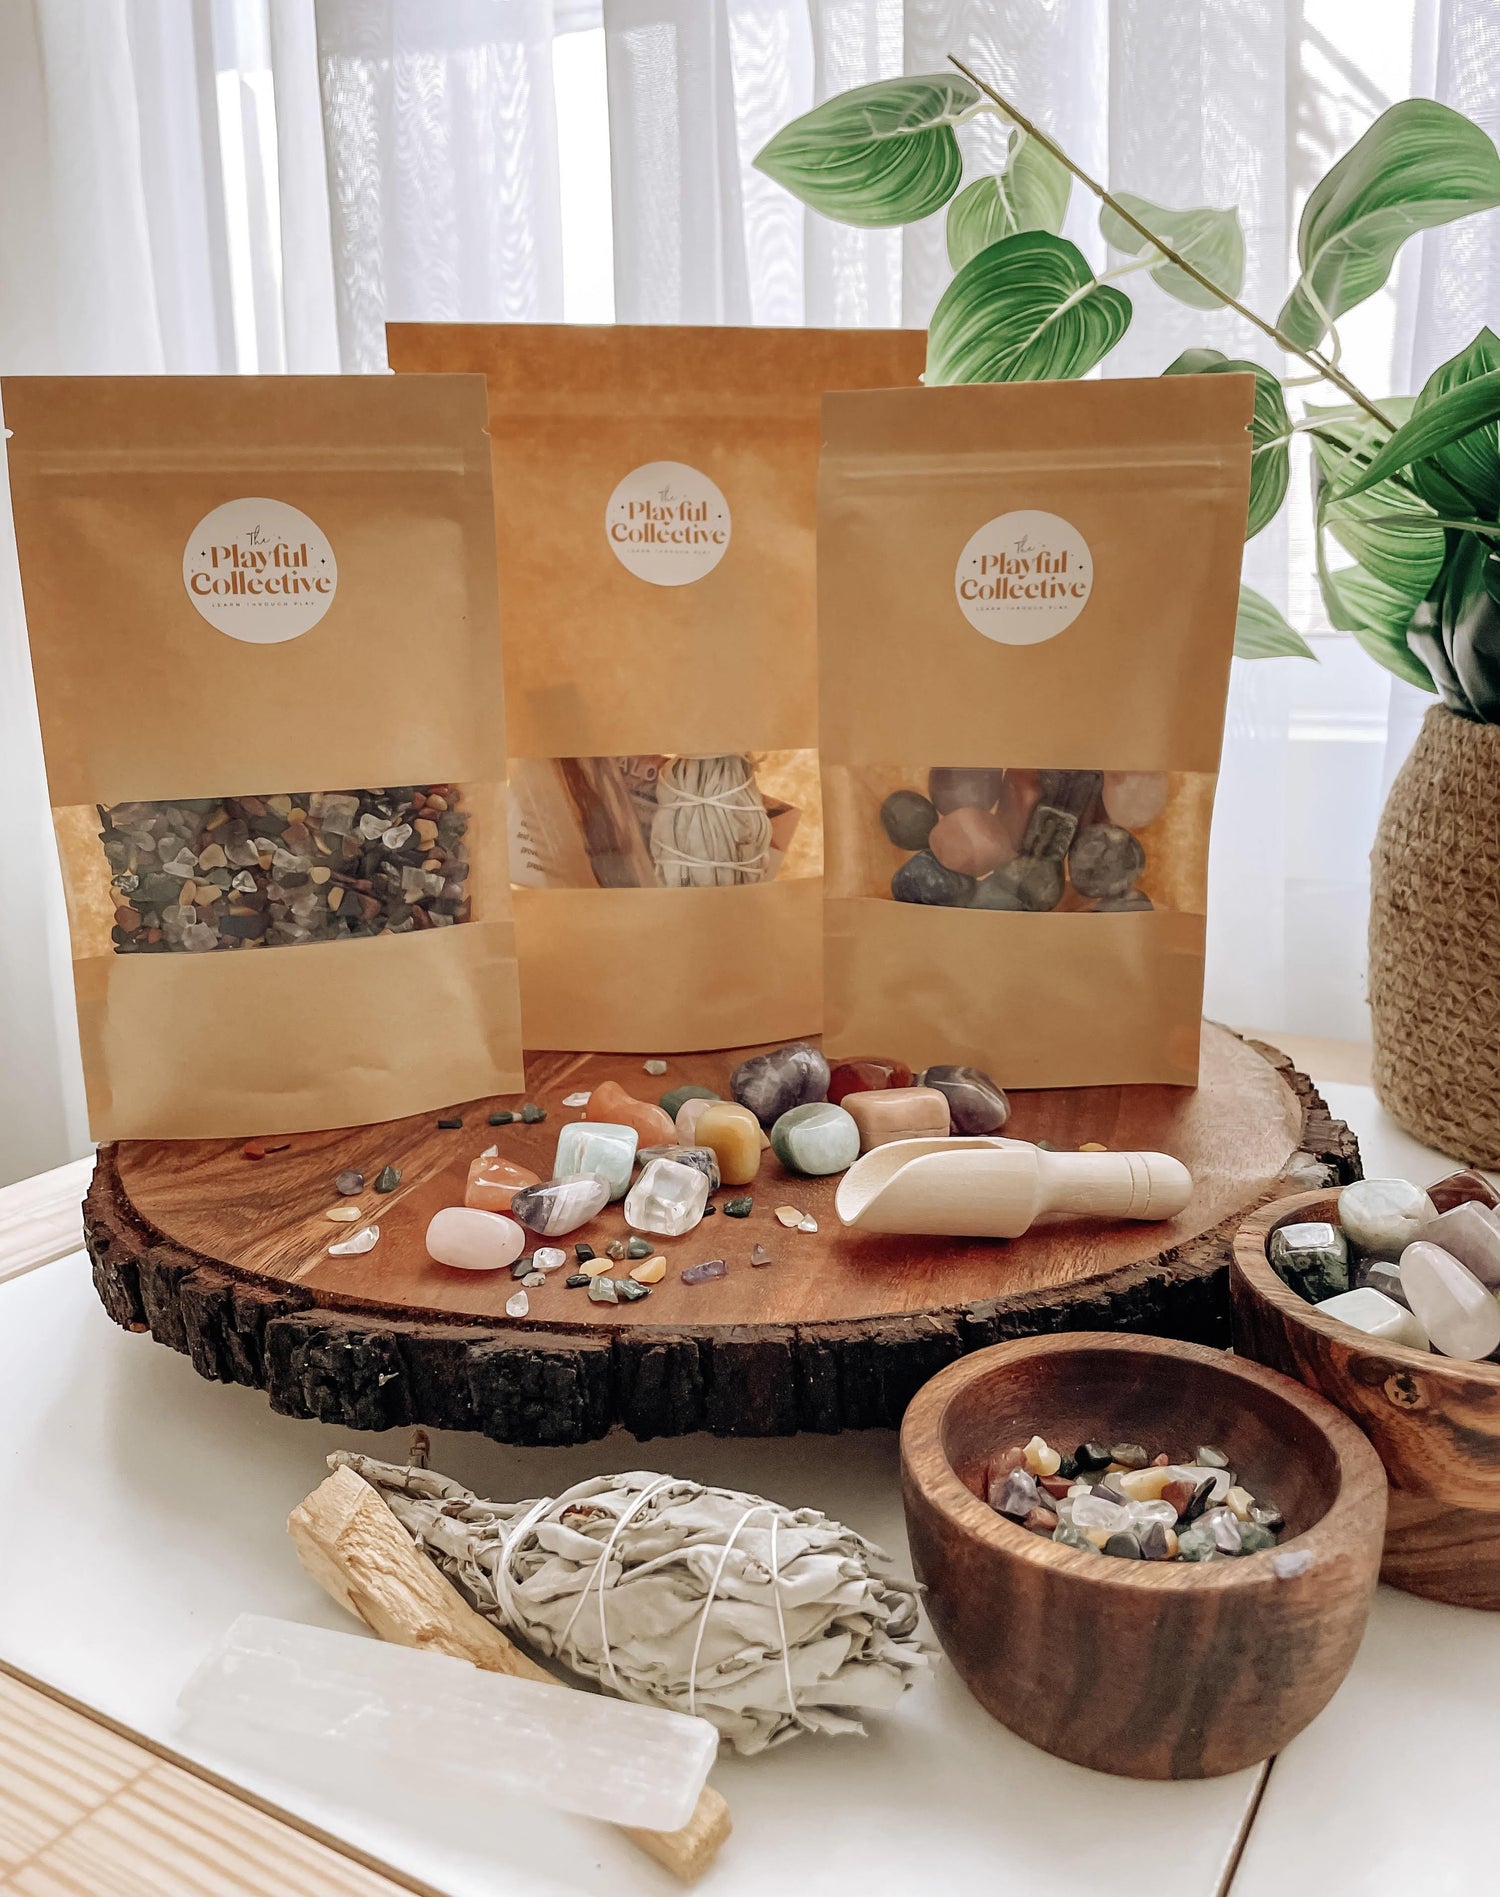 CLEANSING RITUALS PACK by THE PLAYFUL COLLECTIVE - The Playful Collective